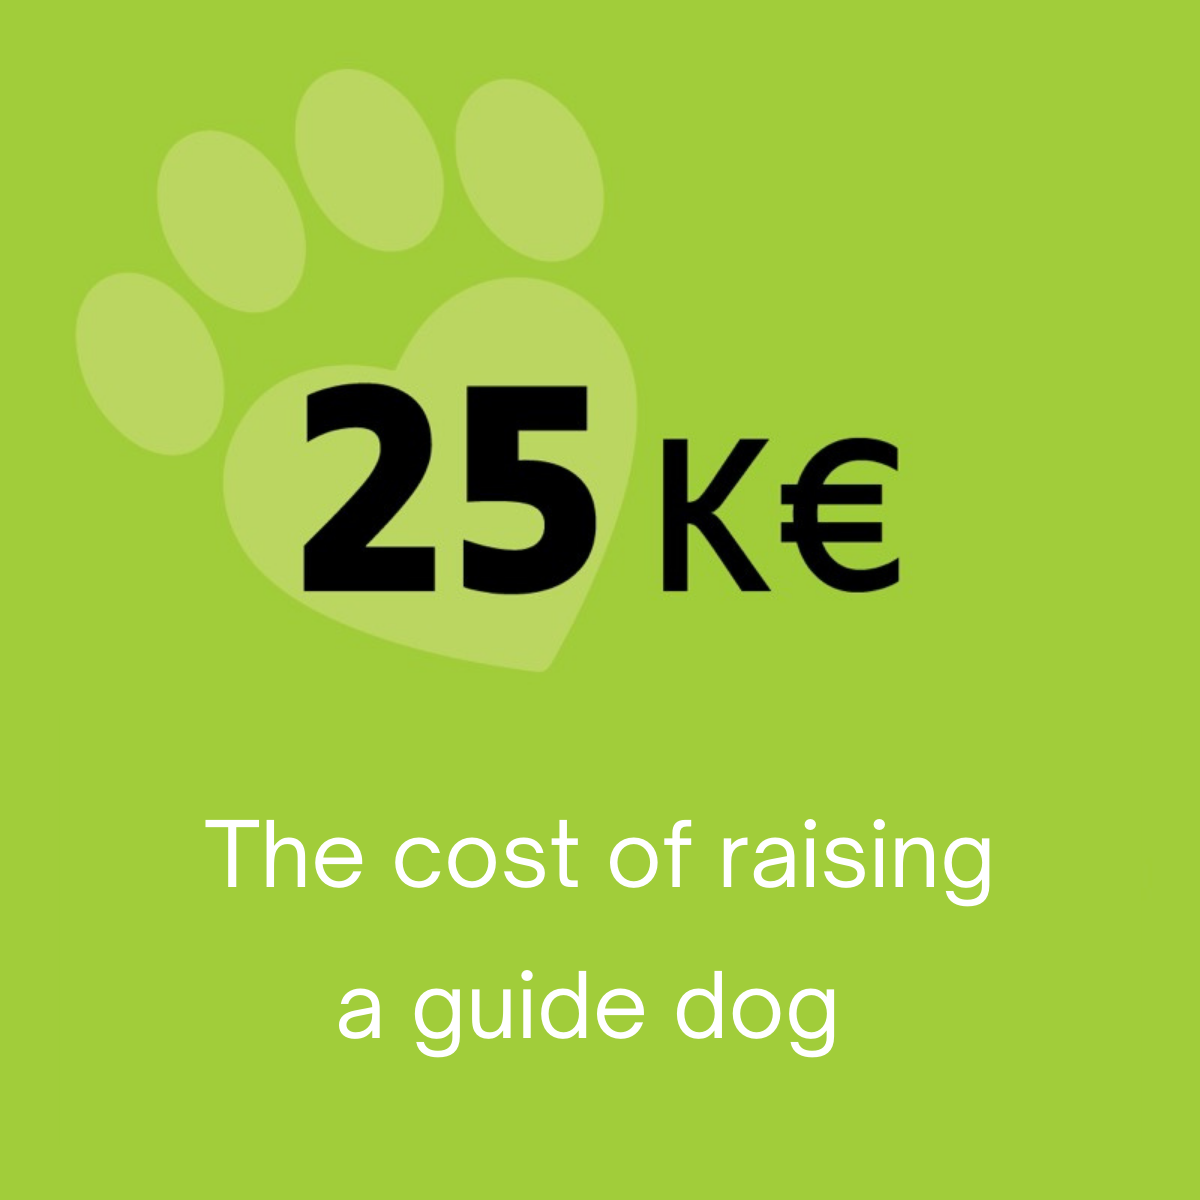 25K€ the cost of raising a guide dog